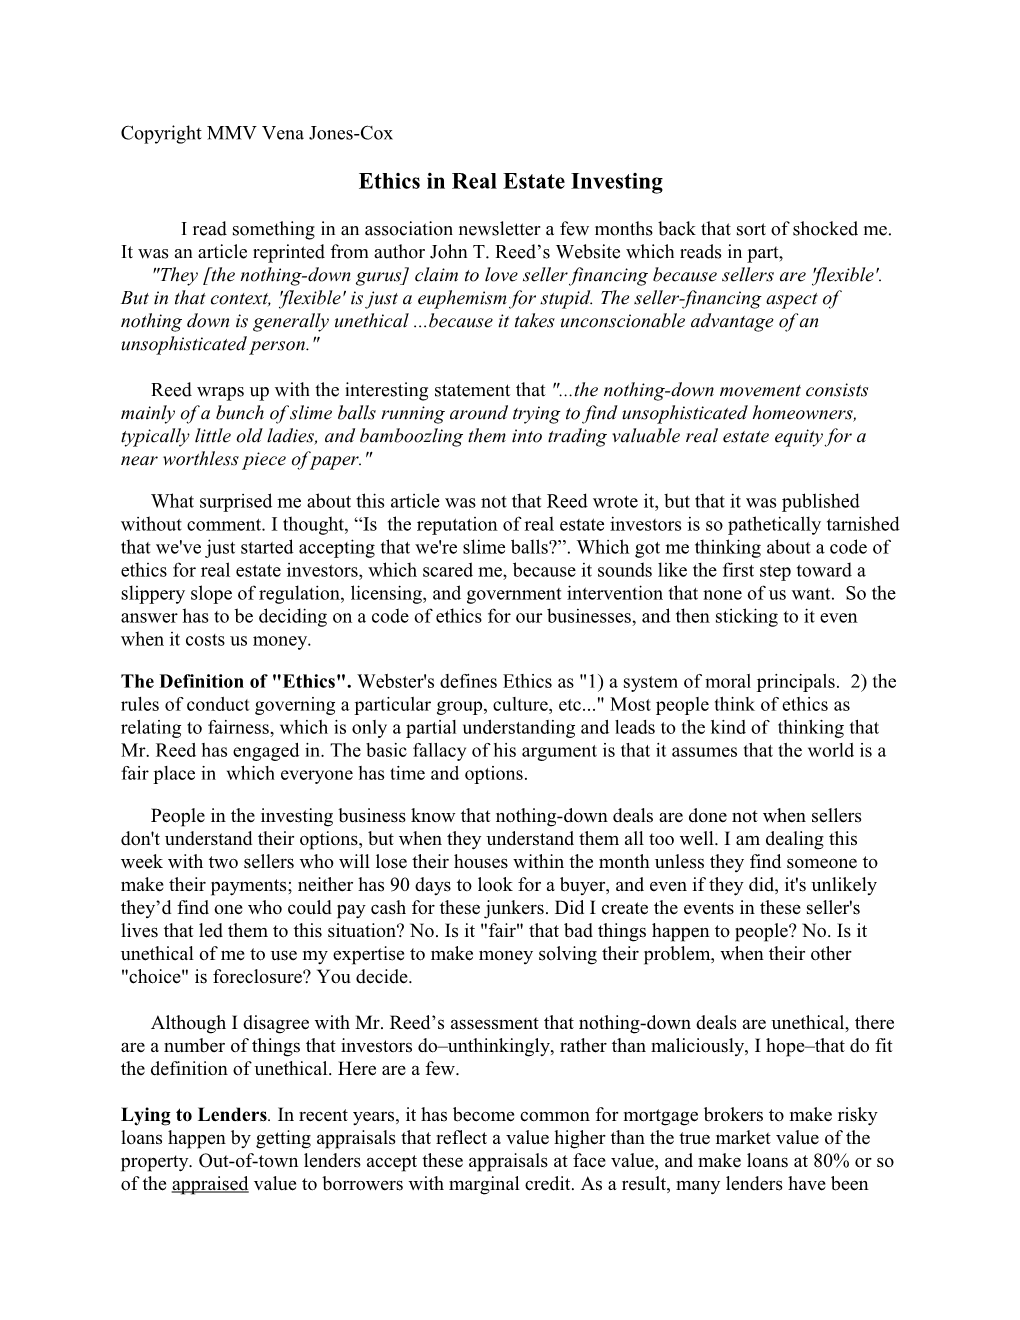 Ethics in Real Estate Investing